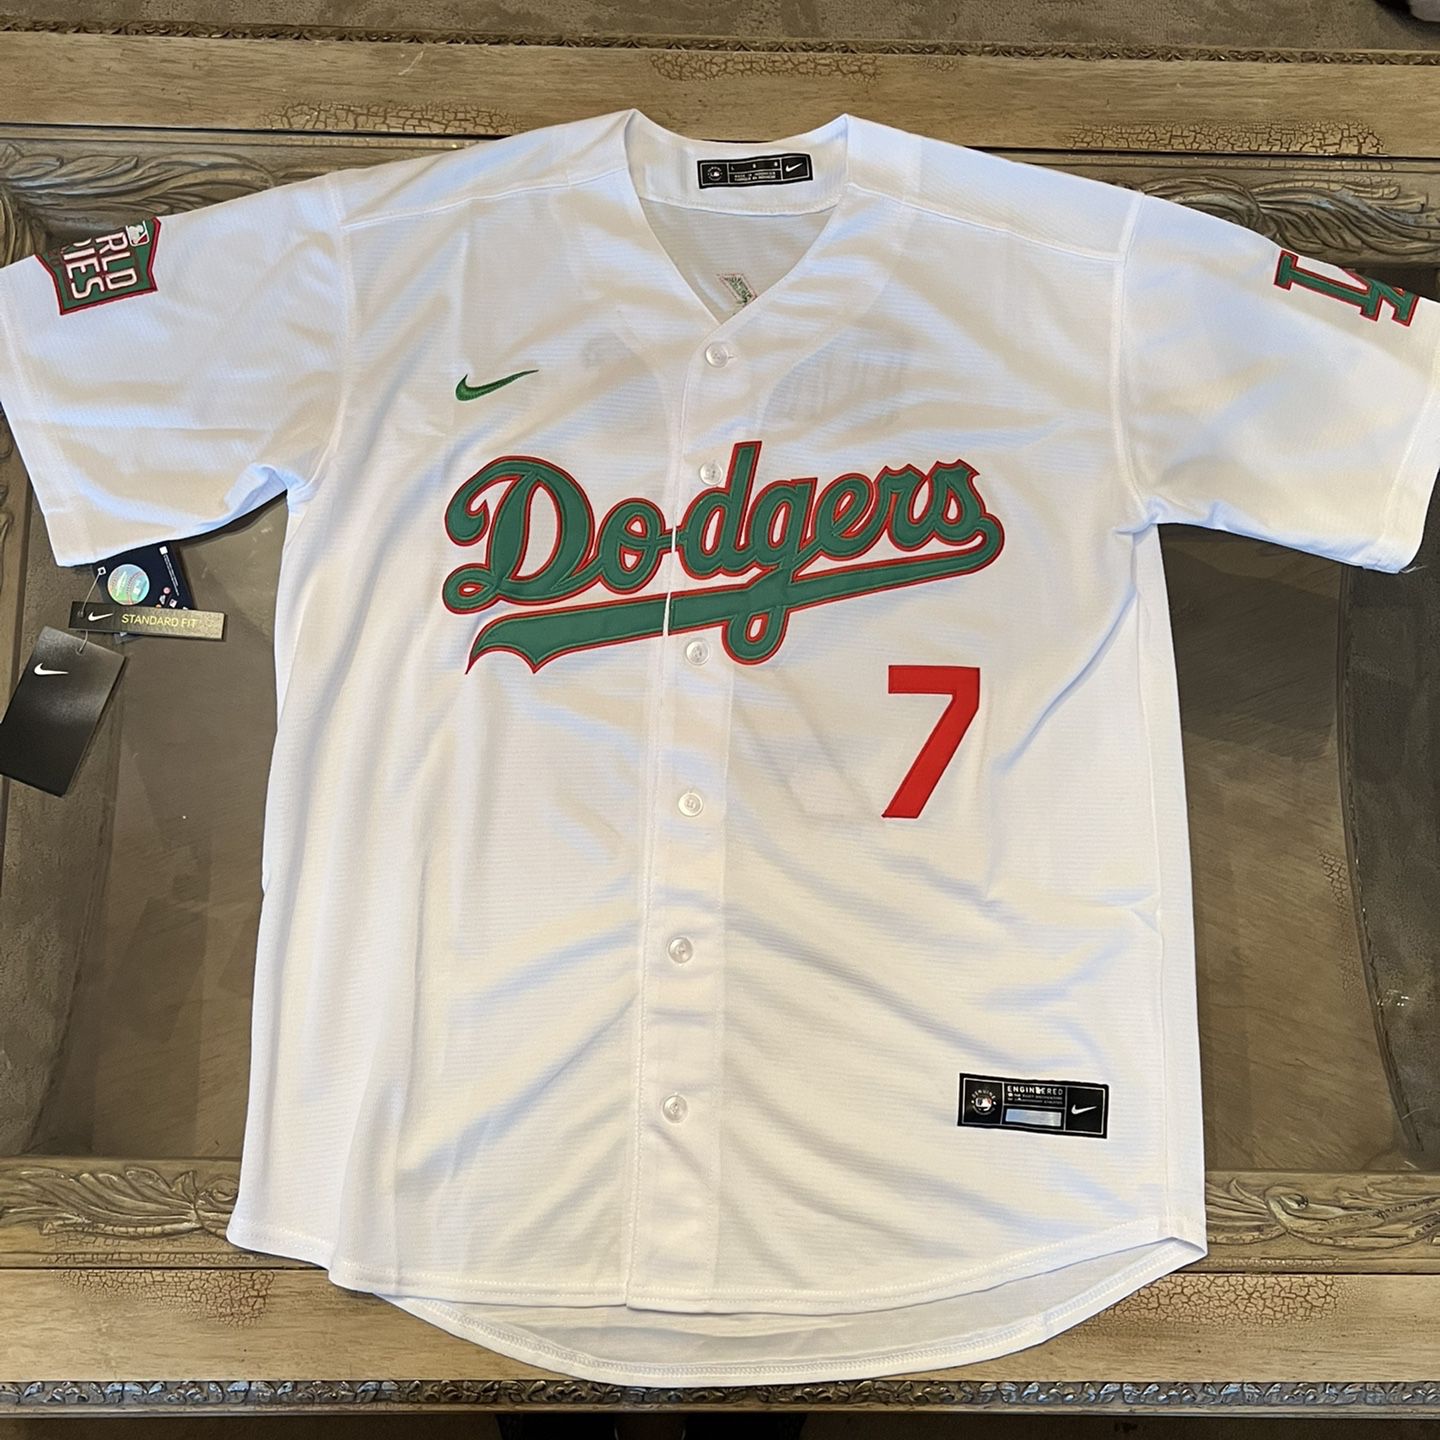 Dodgers Julio Urias Jersey M L XL for Sale in Los Angeles, CA - OfferUp